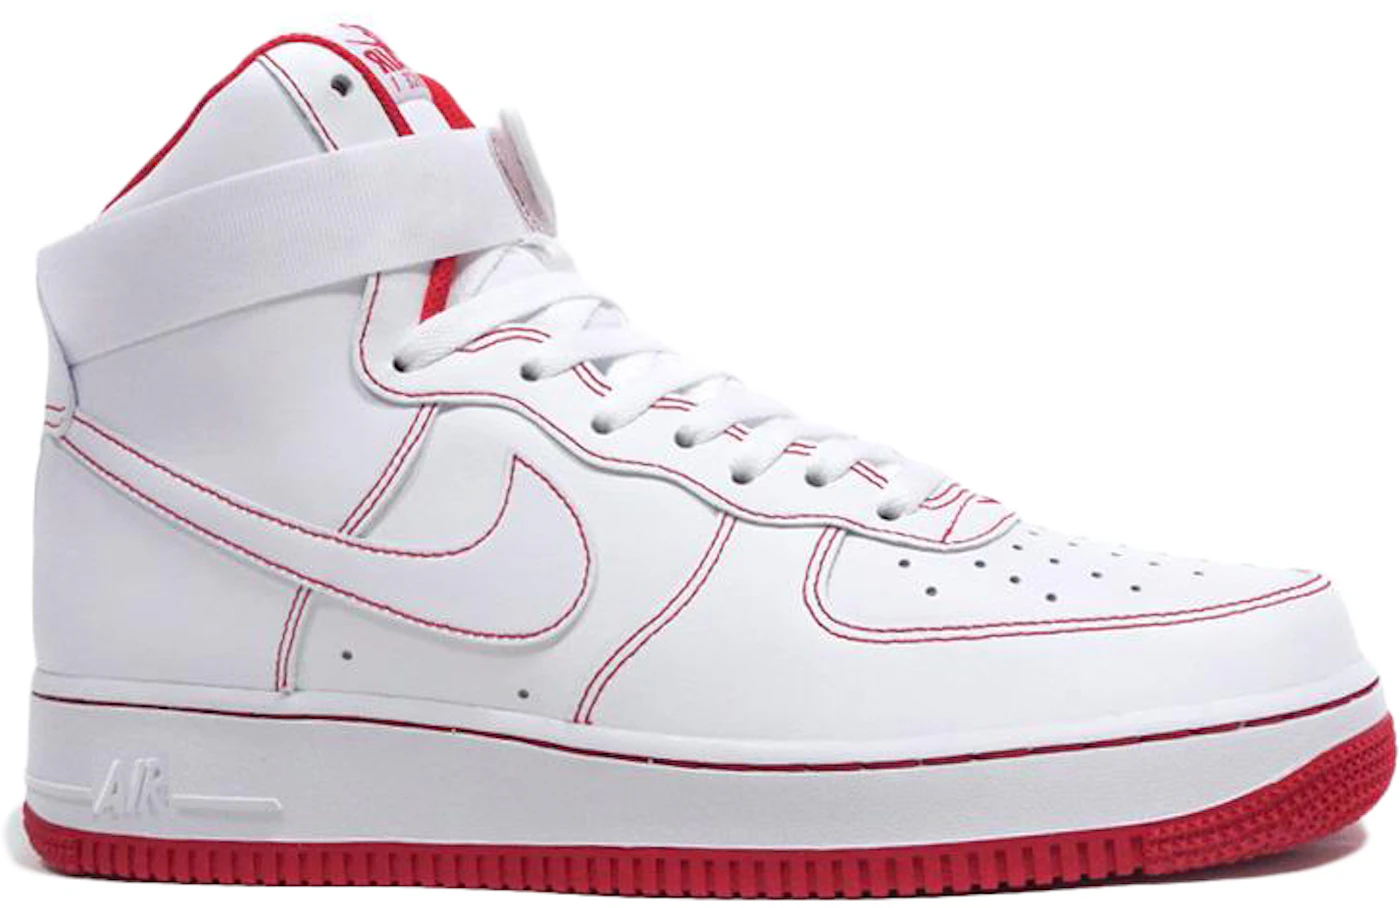 🔴 Full Red LV Custom AF1s 🔴  White nike shoes, Nike air shoes, Hype shoes